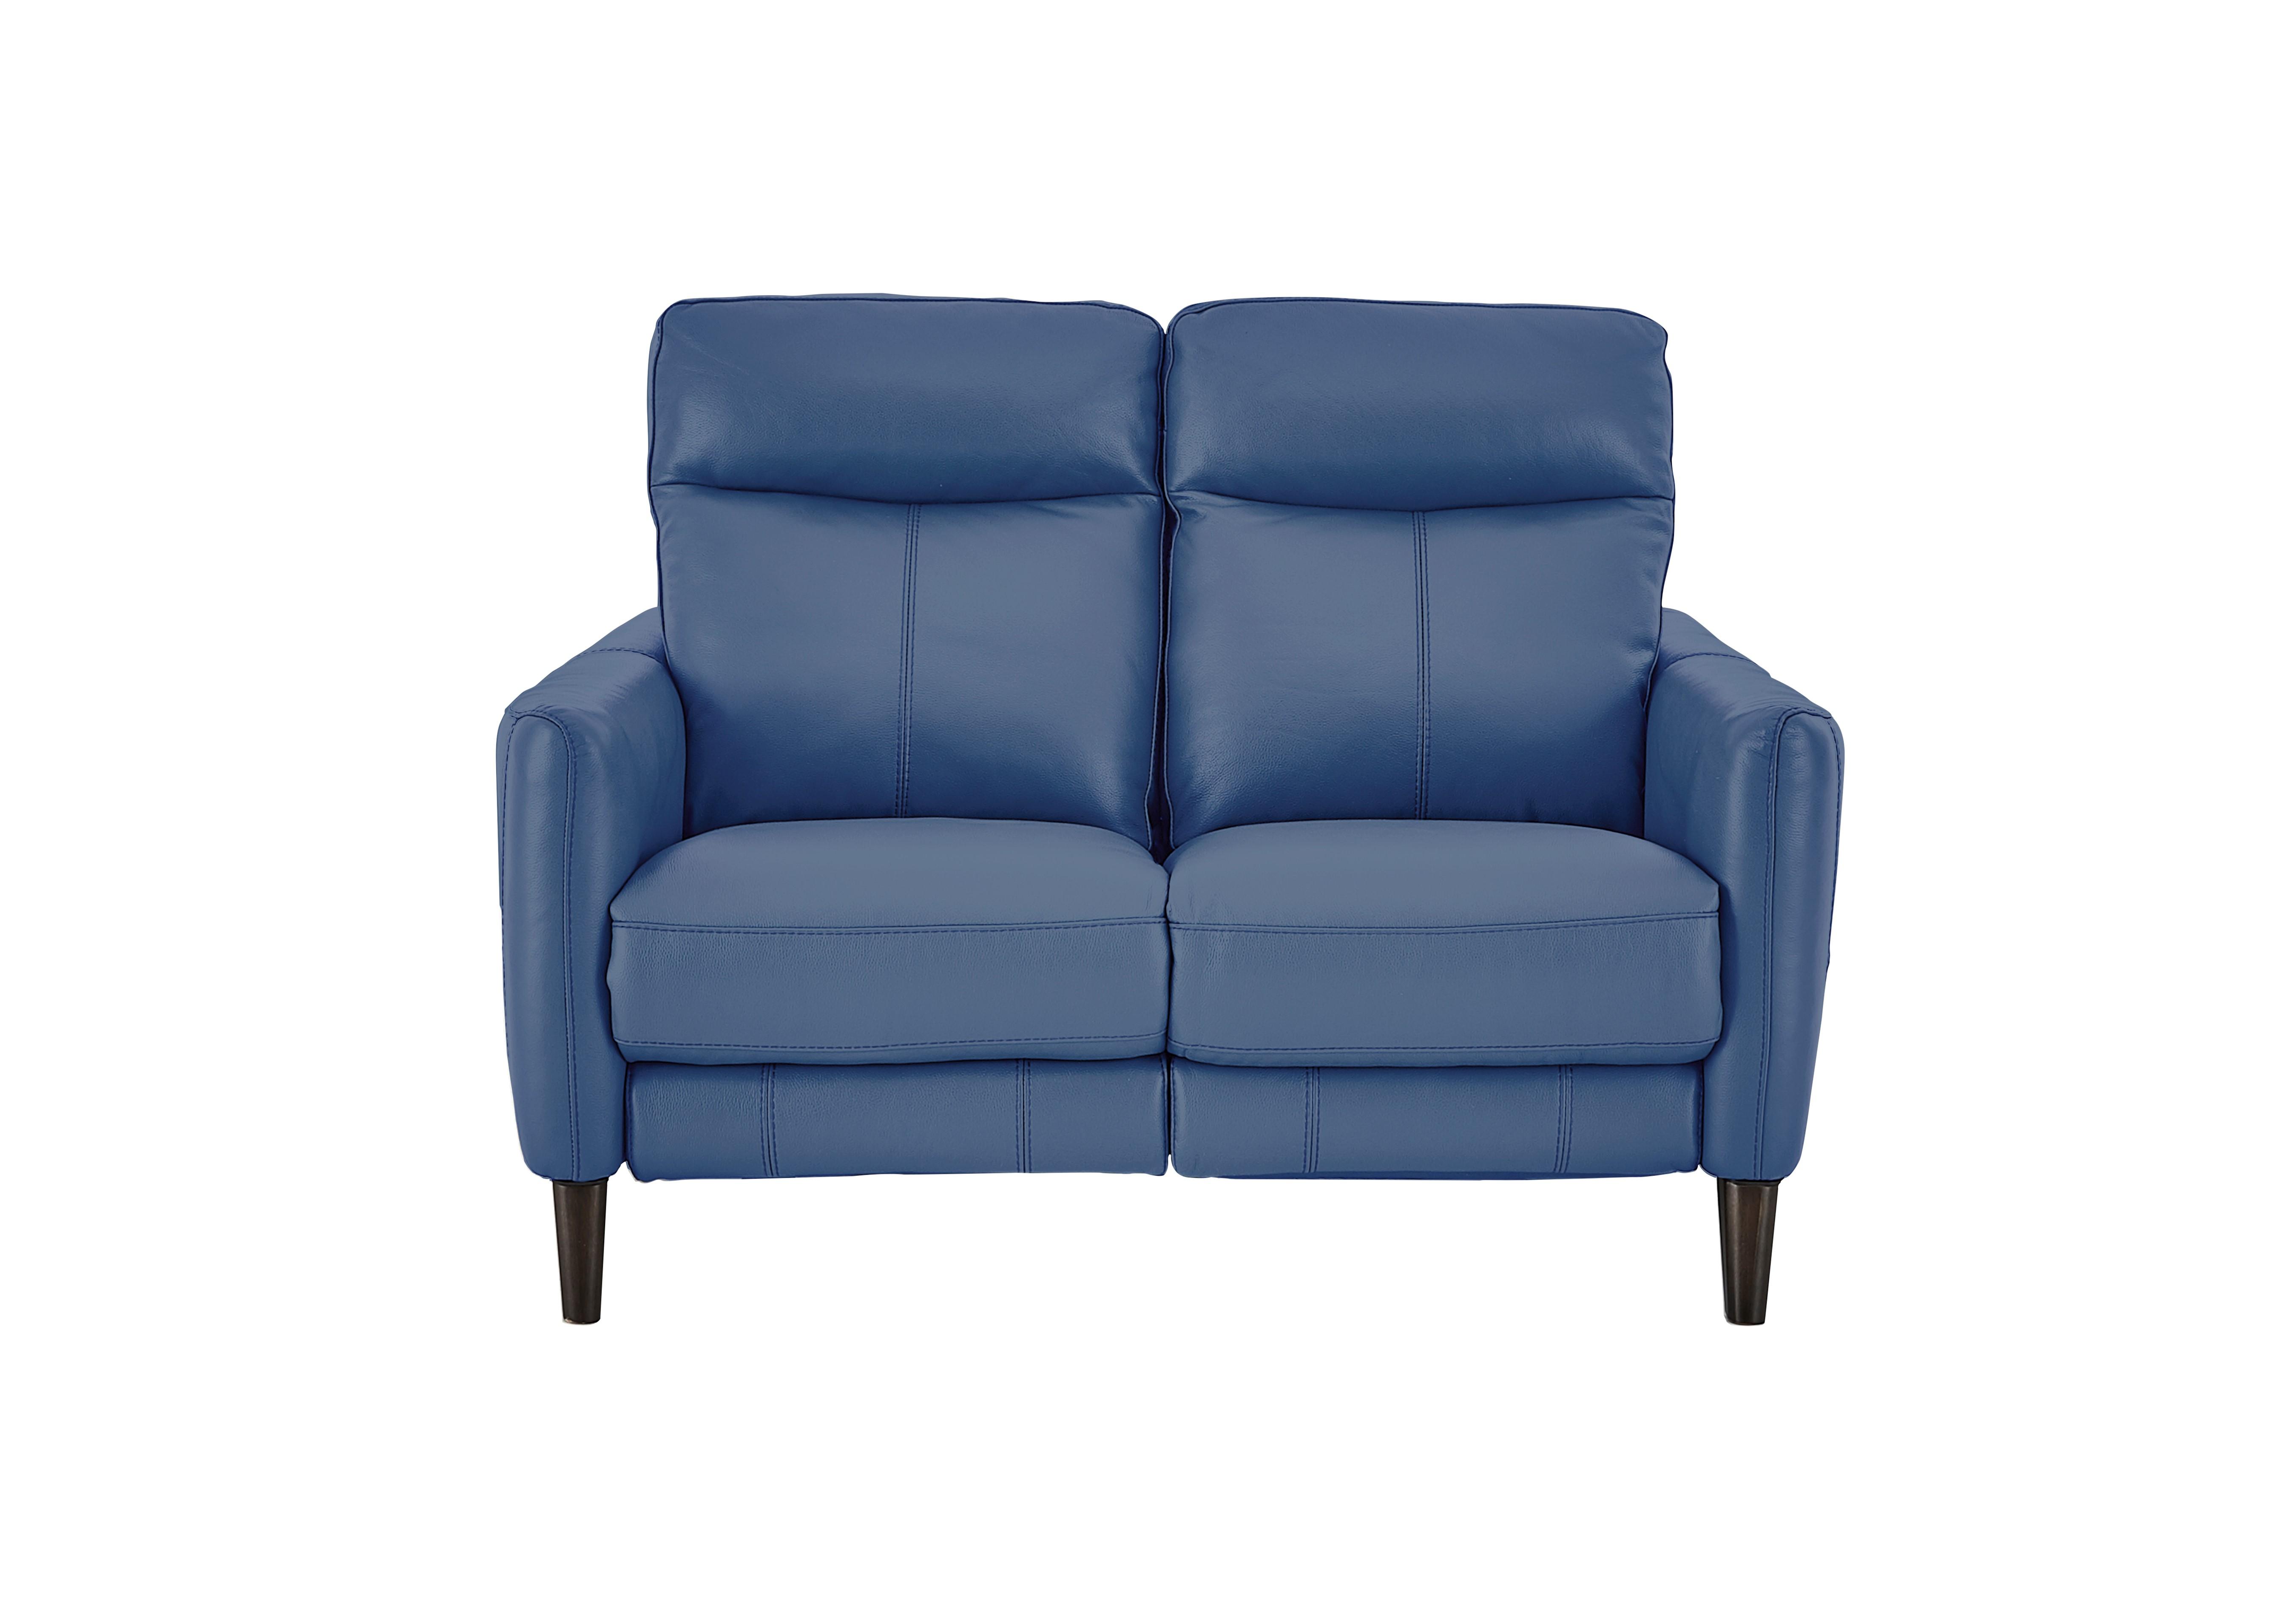 Compact Collection Petit 2 Seater Leather Sofa in Bv-313e Ocean Blue on Furniture Village